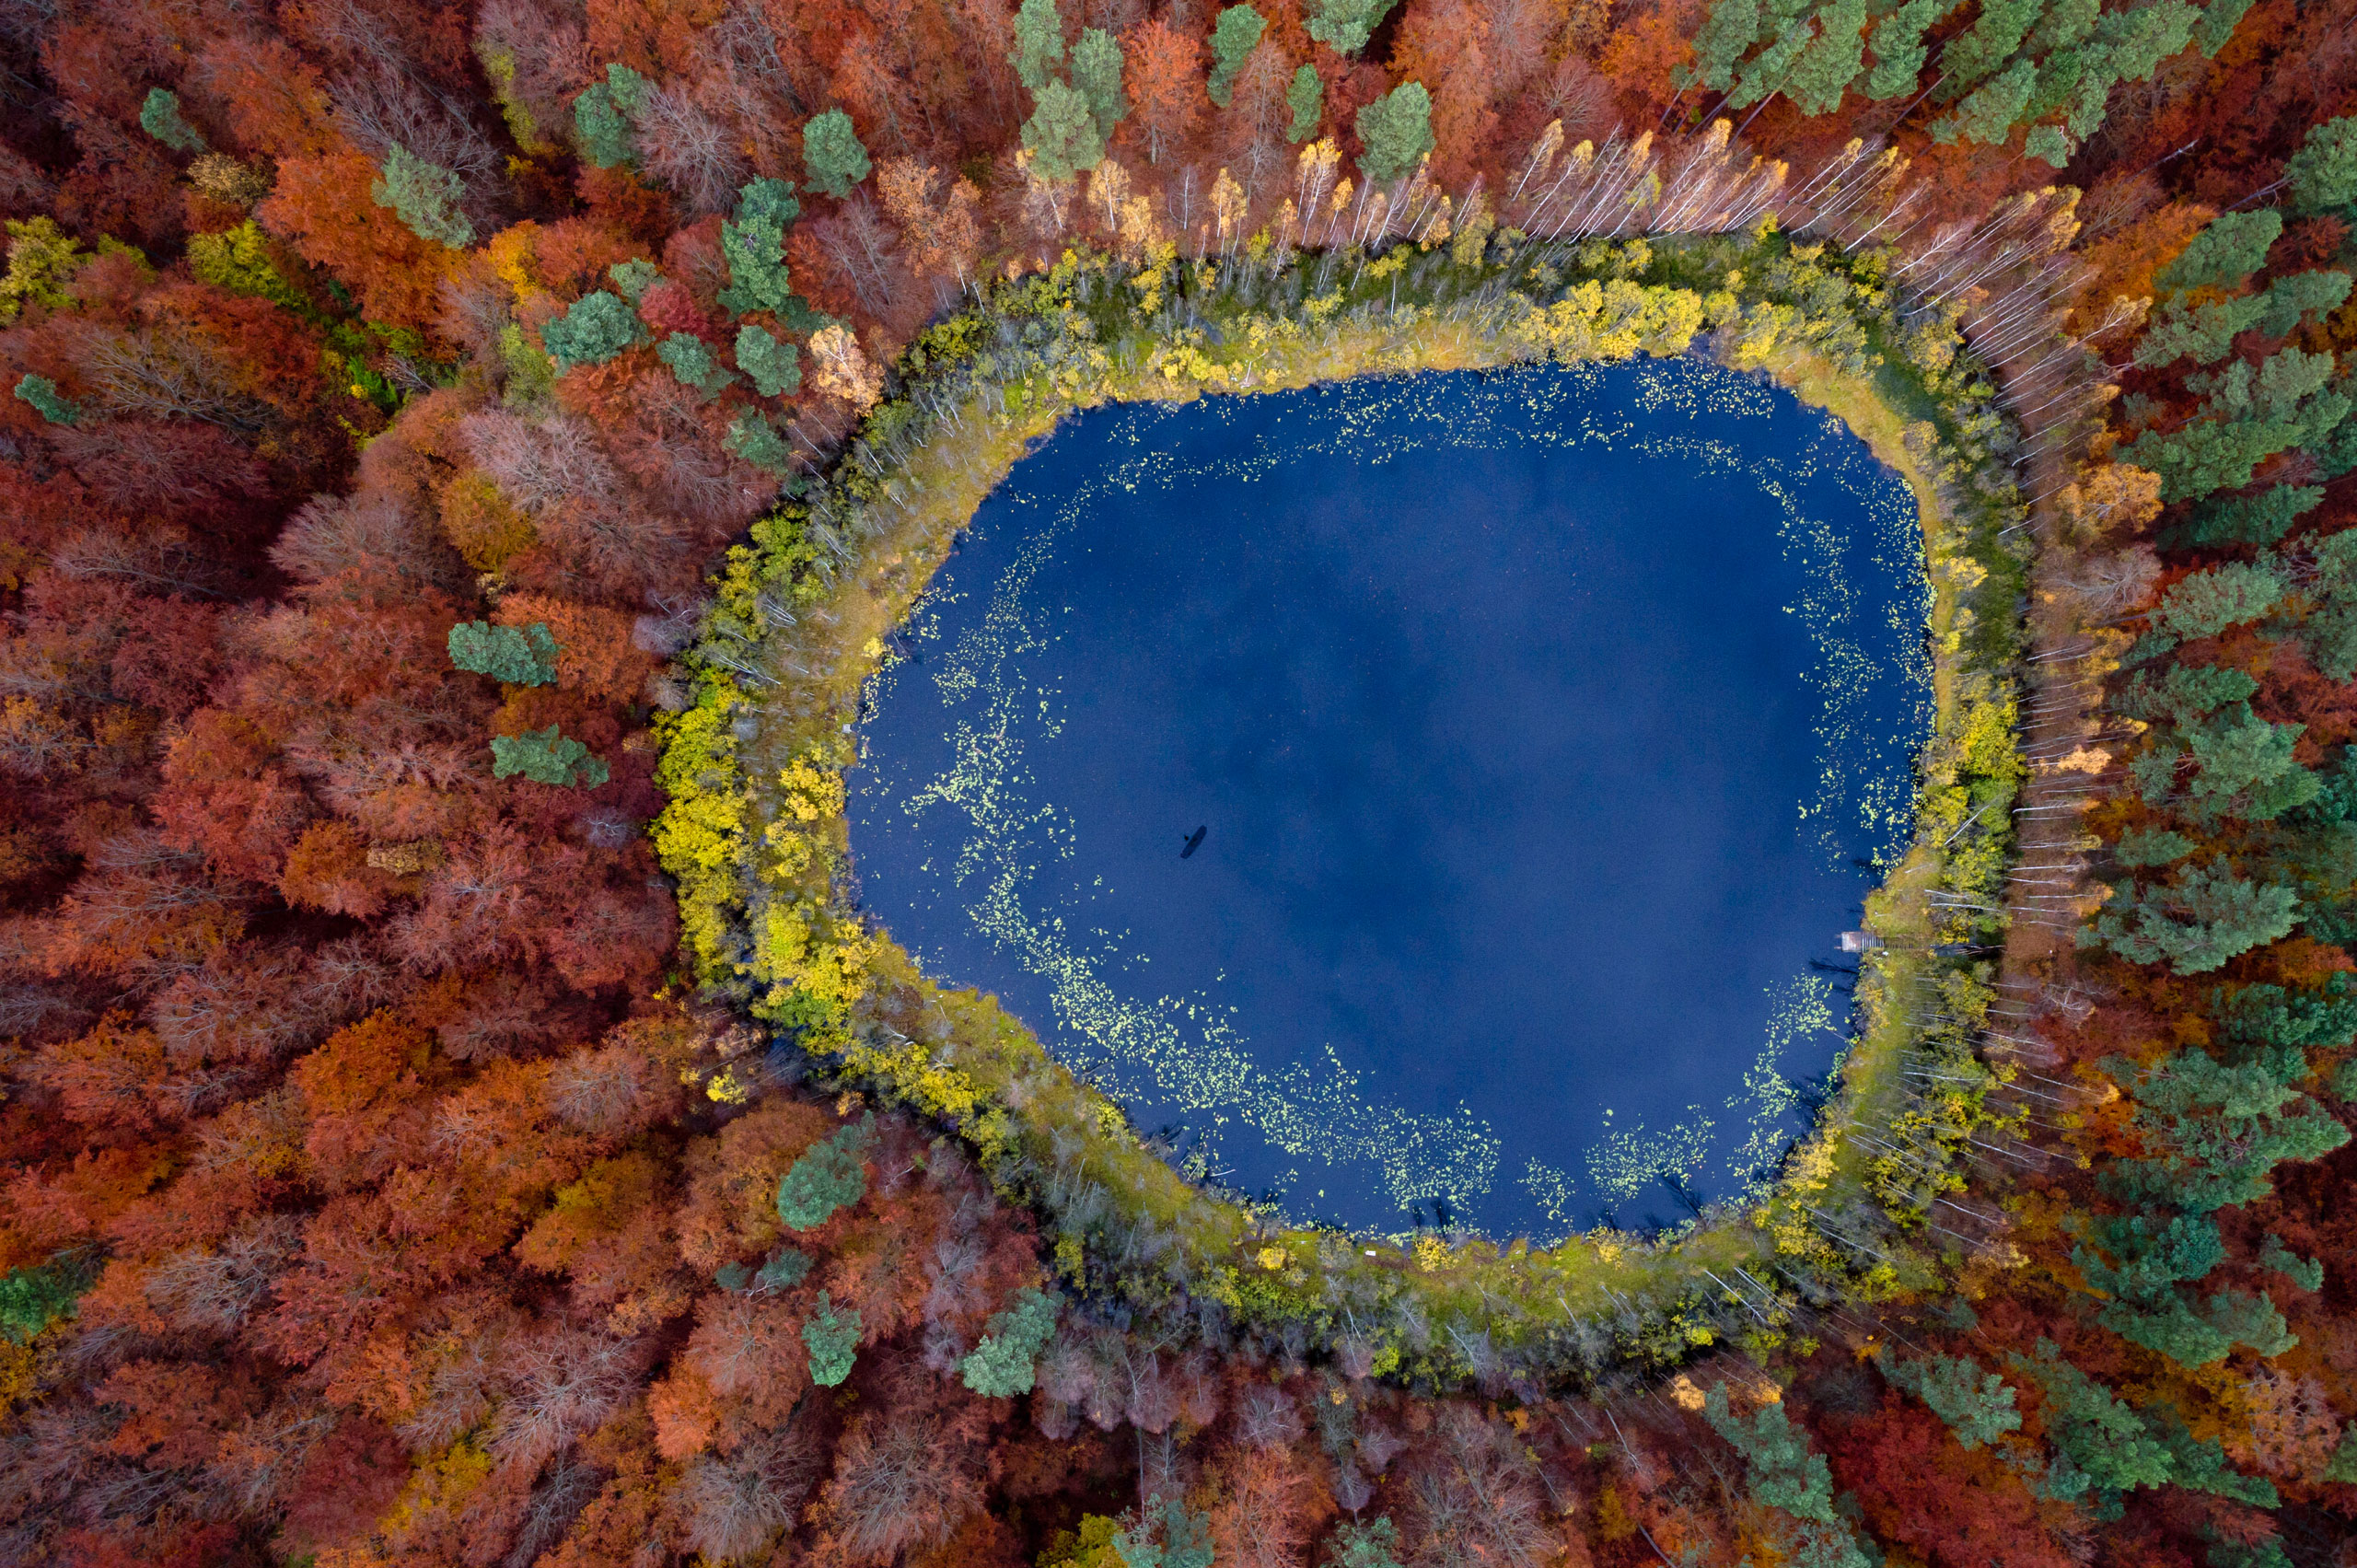 A view over a lake in a forest with trees changing colour in autumn in Kashubia.